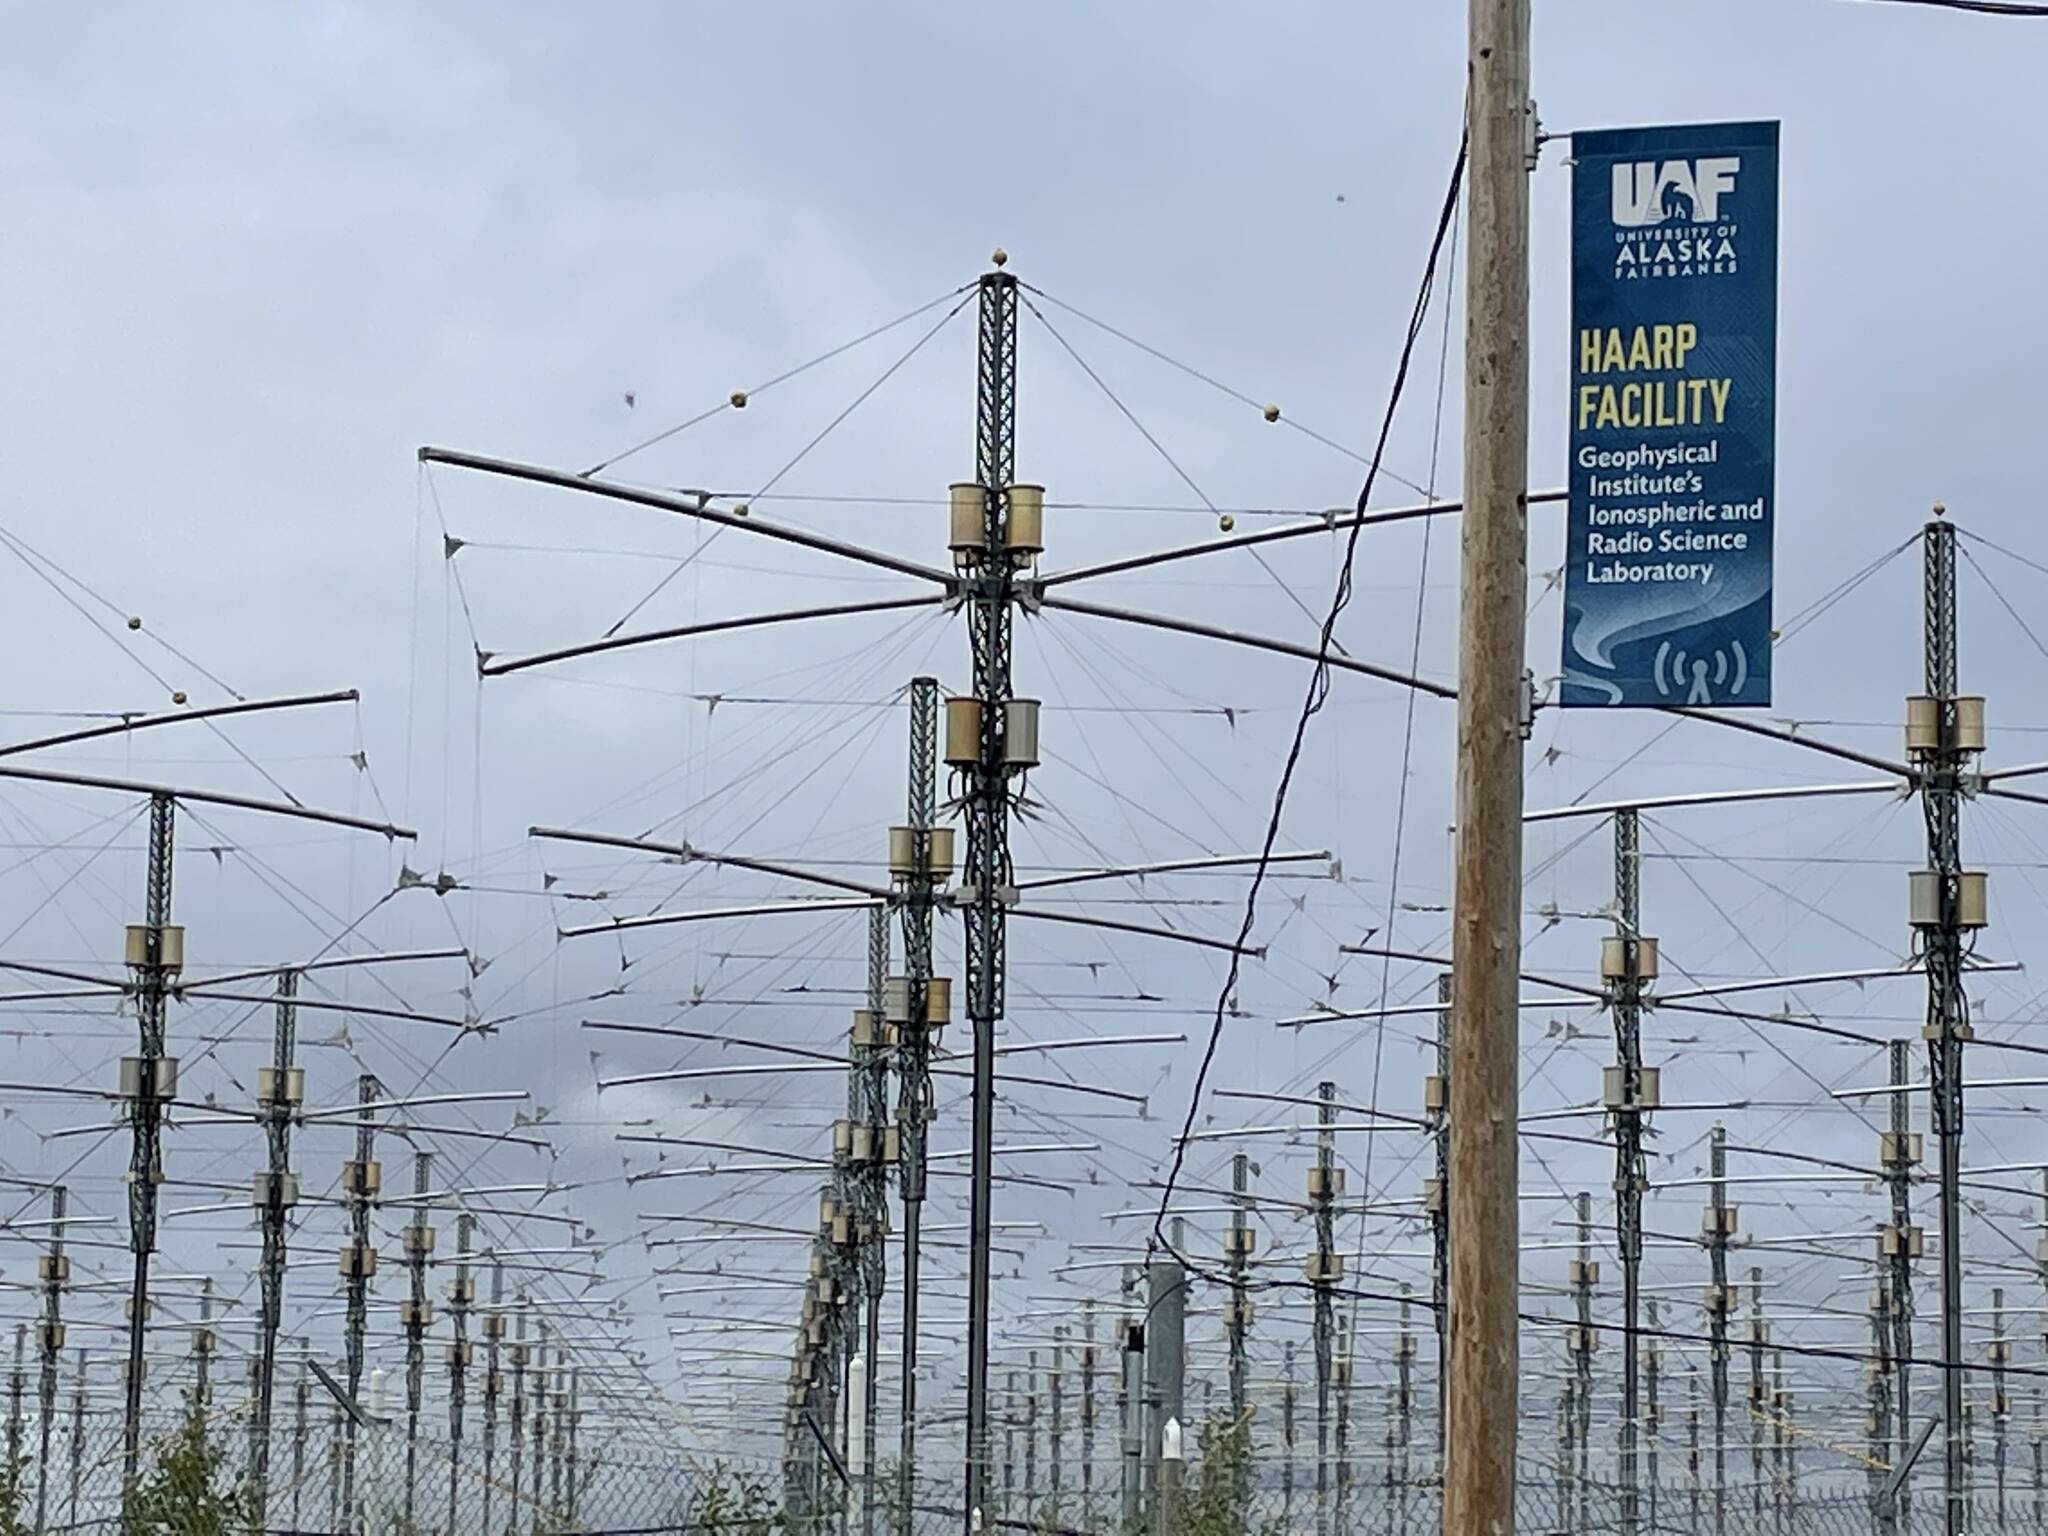 The upper atmosphere-heating facility named HAARP is located on about 5,000 acres between the small Alaska towns of Glennallen and Tok. (Courtesy Photo / Ned Rozell)